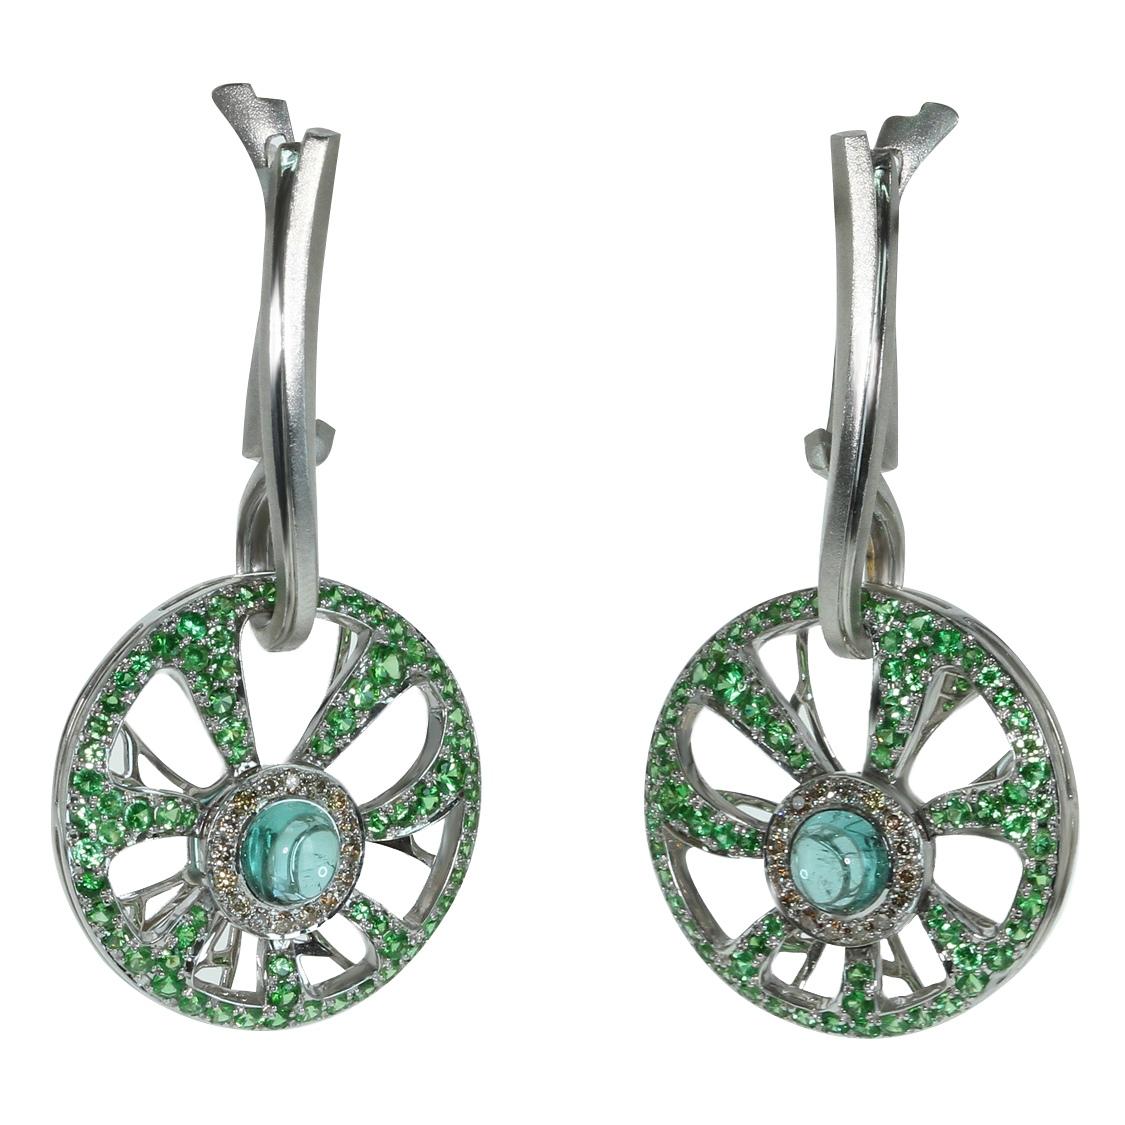 Diamond Tourmaline Tsavorite 18 Karat White Gold Earrings

Unusual neon-greenish Brazilian tourmaline trapped by tsavorite spider web. Gently combination of pure green, light champagne and neon-green attract attention. It`s hard to escape from